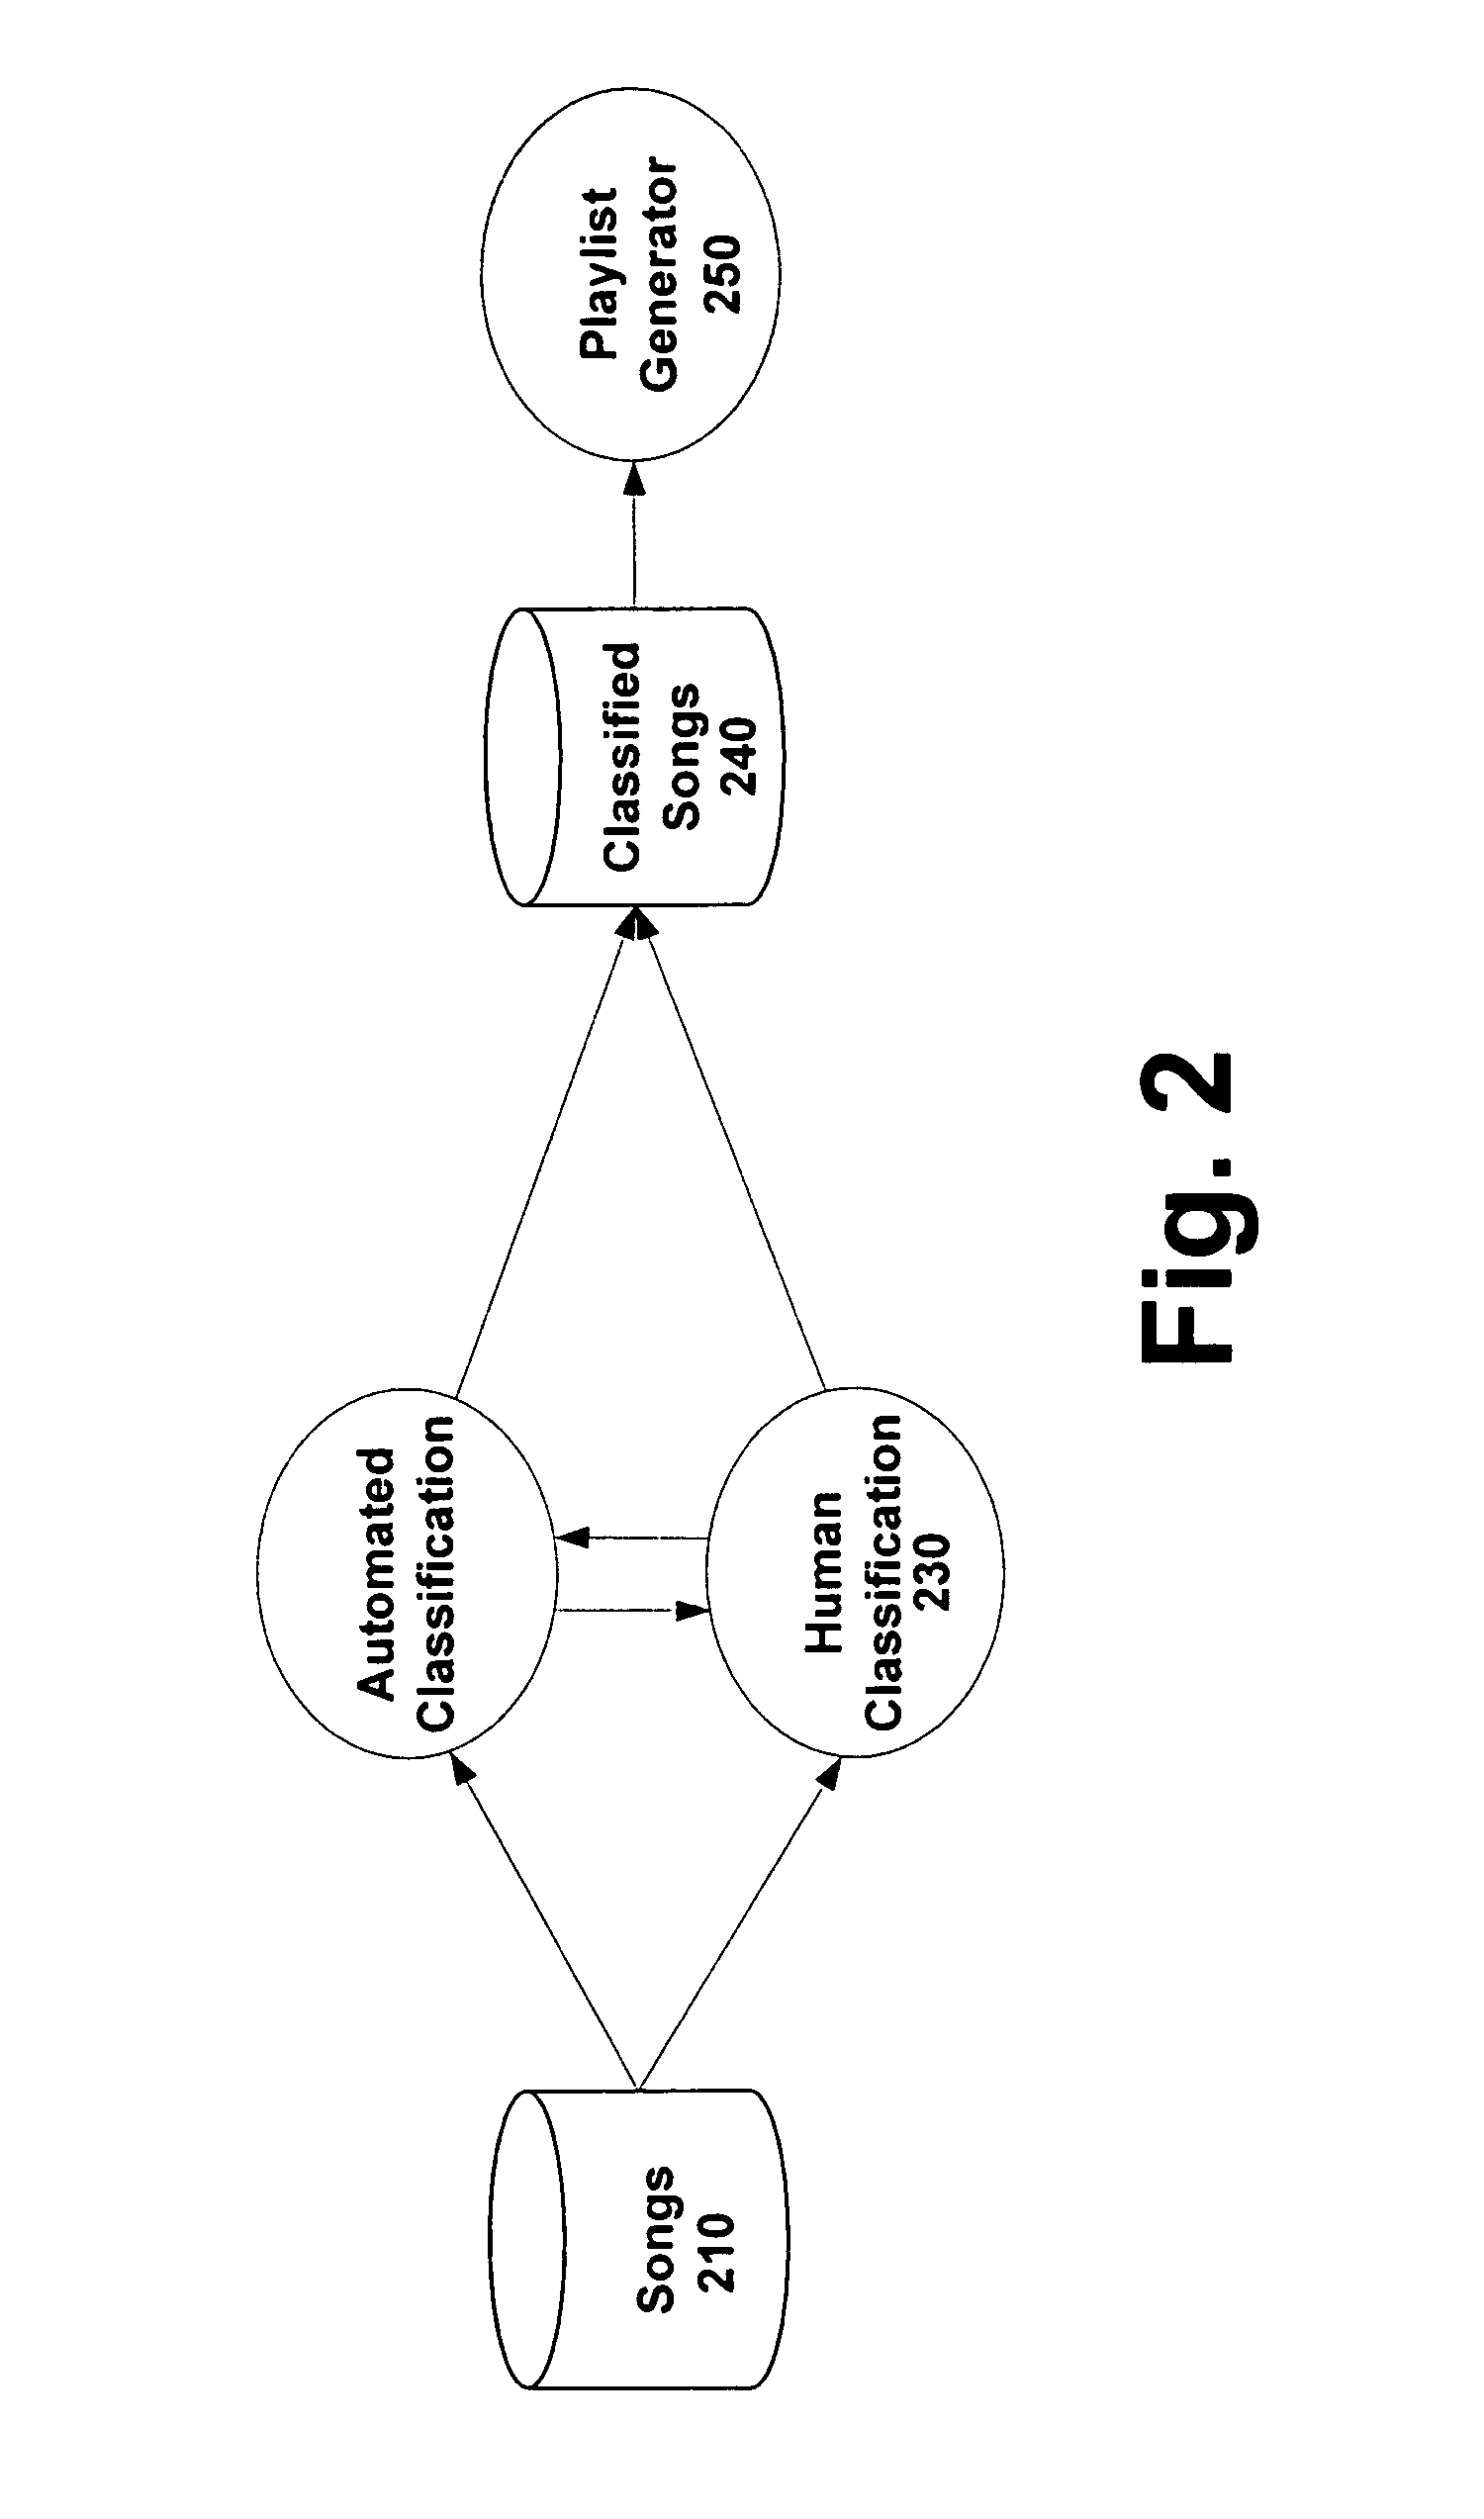 System and methods for providing automatic classification of media entities according to tempo properties